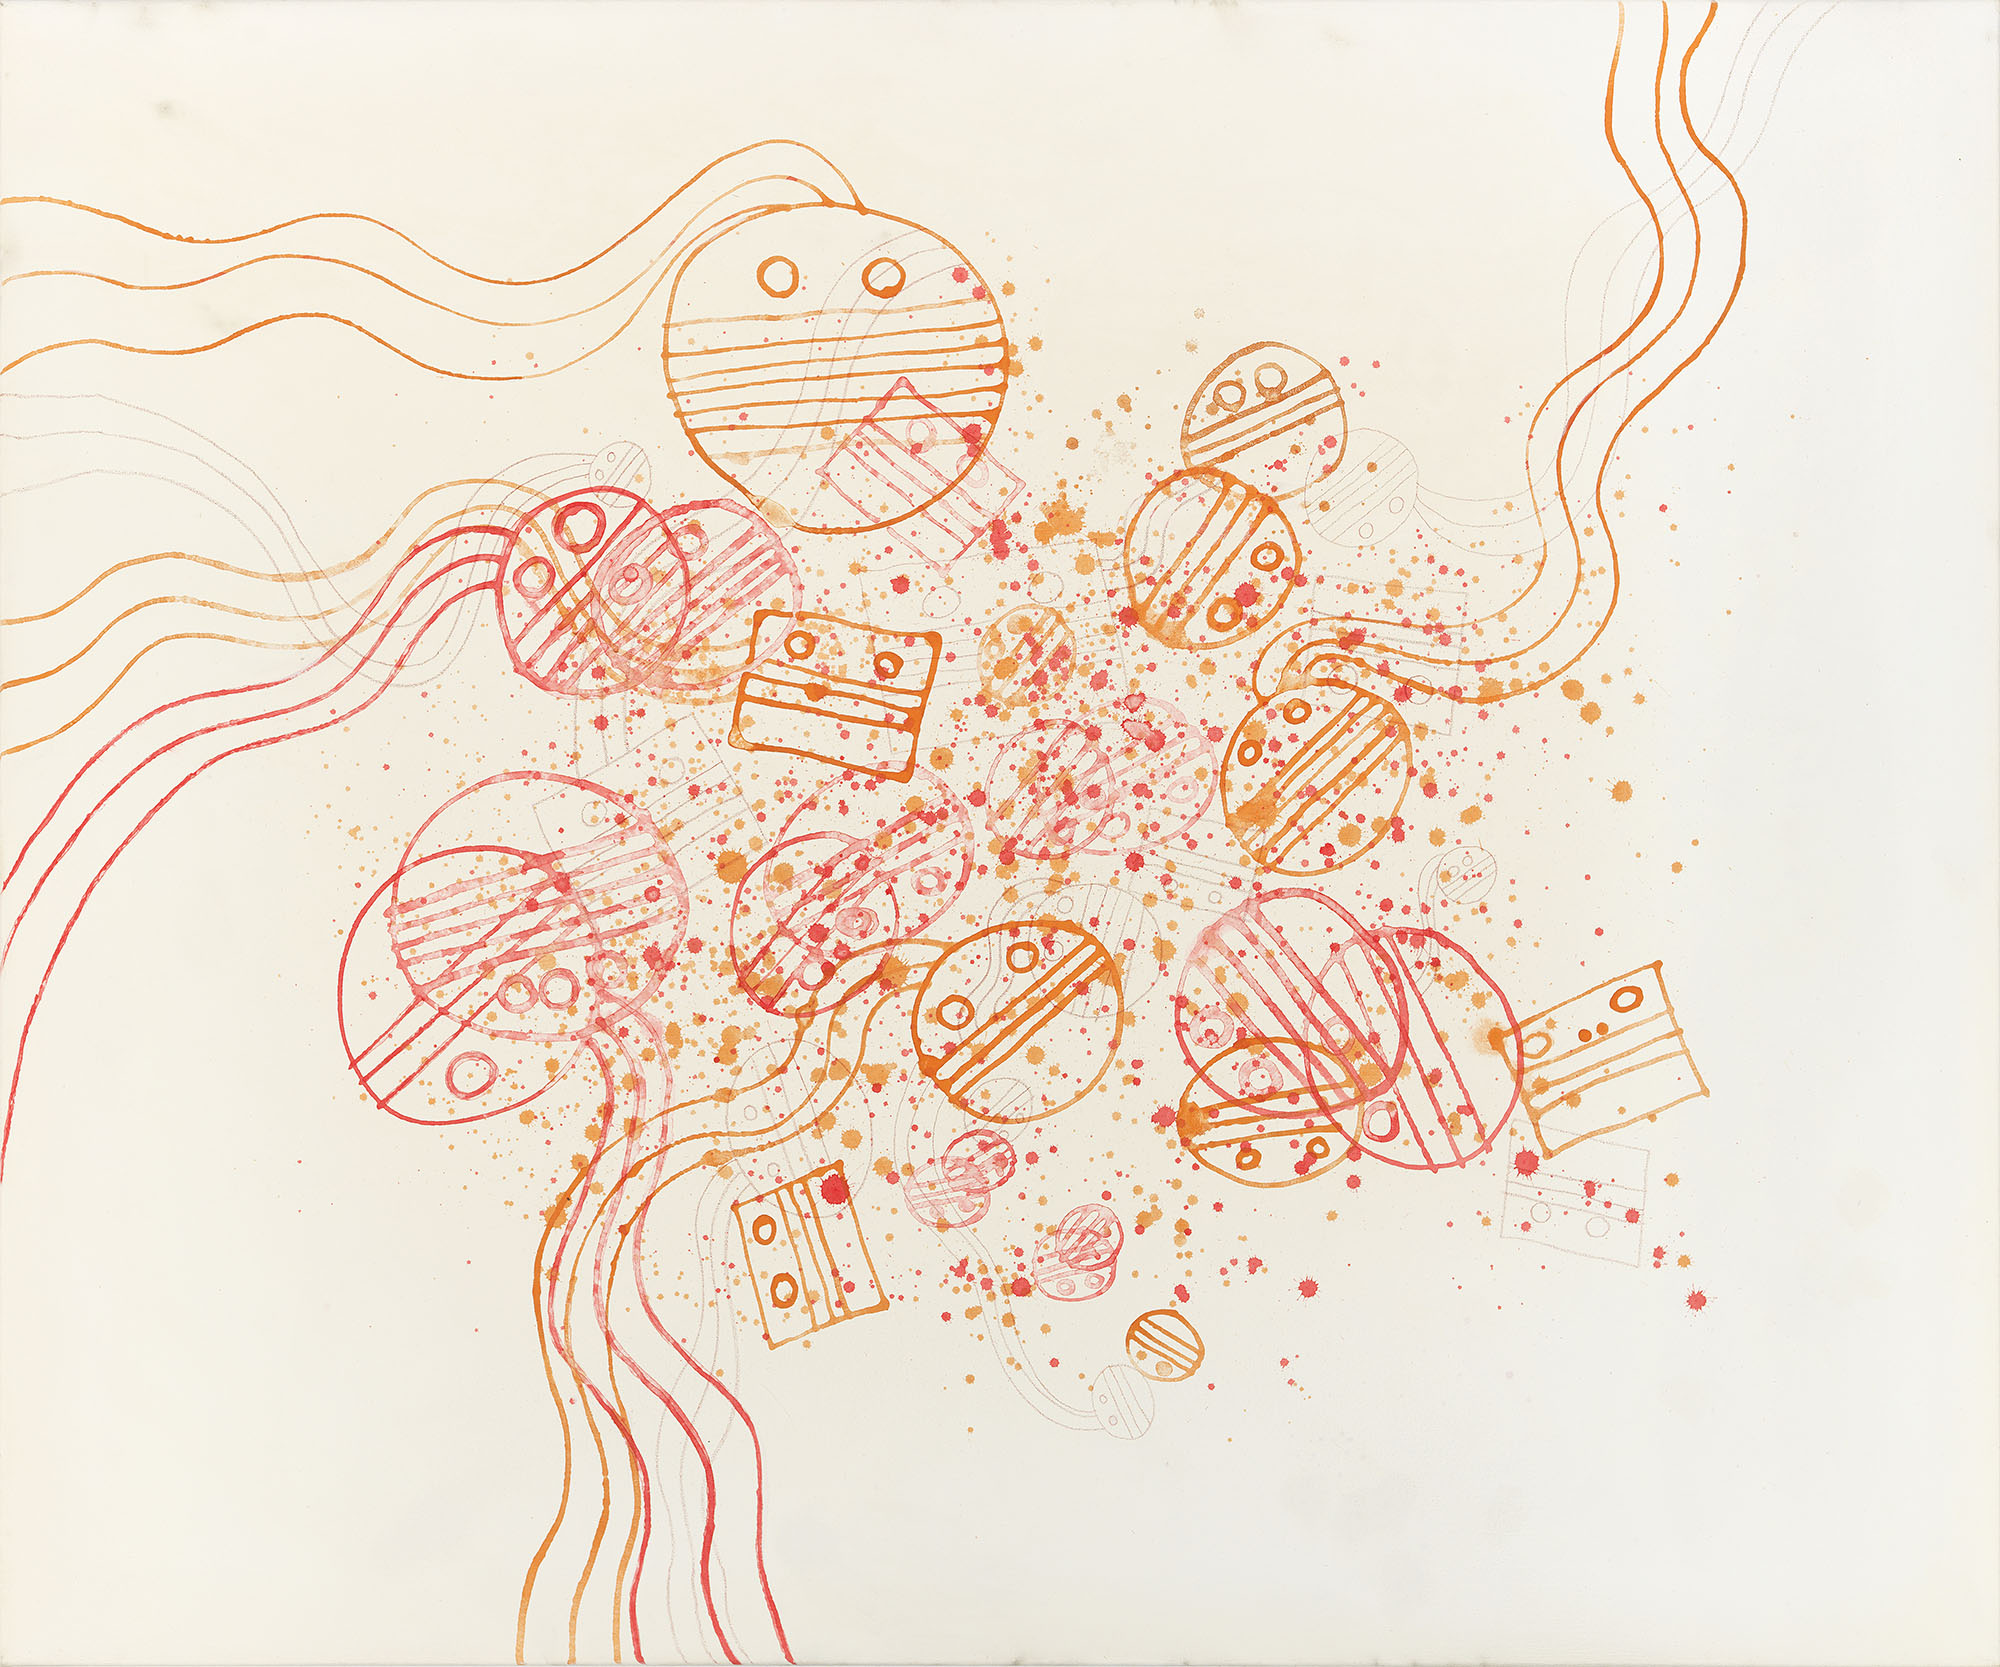 Dominick Di Meo, Love Song, 1968. Acrylic and crayon on canvas. Courtesy of the artist